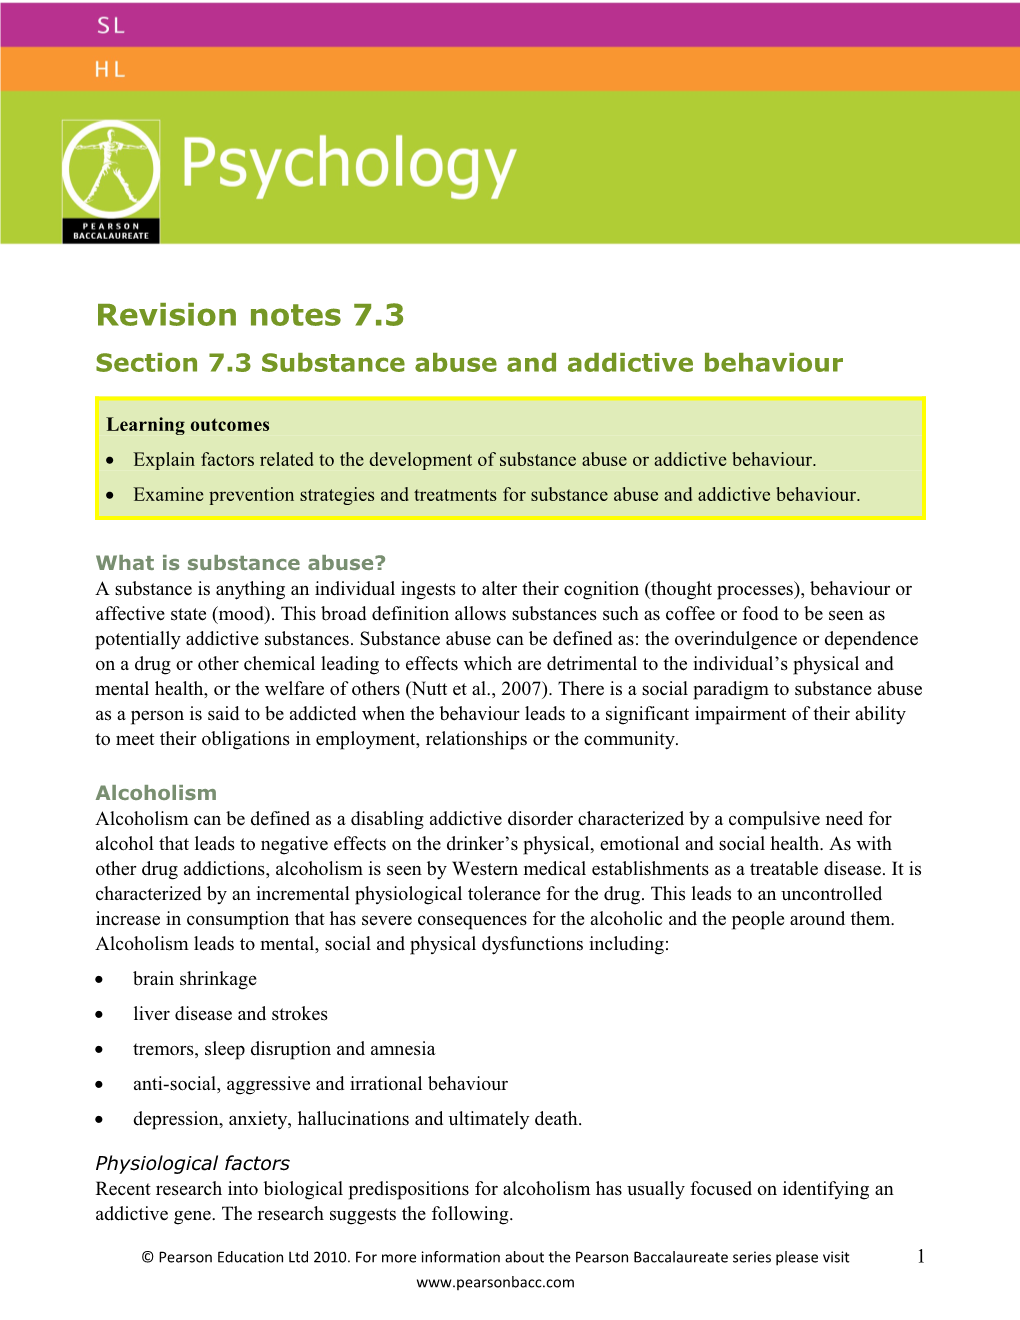 Section 7.3 Substance Abuse and Addictive Behaviour